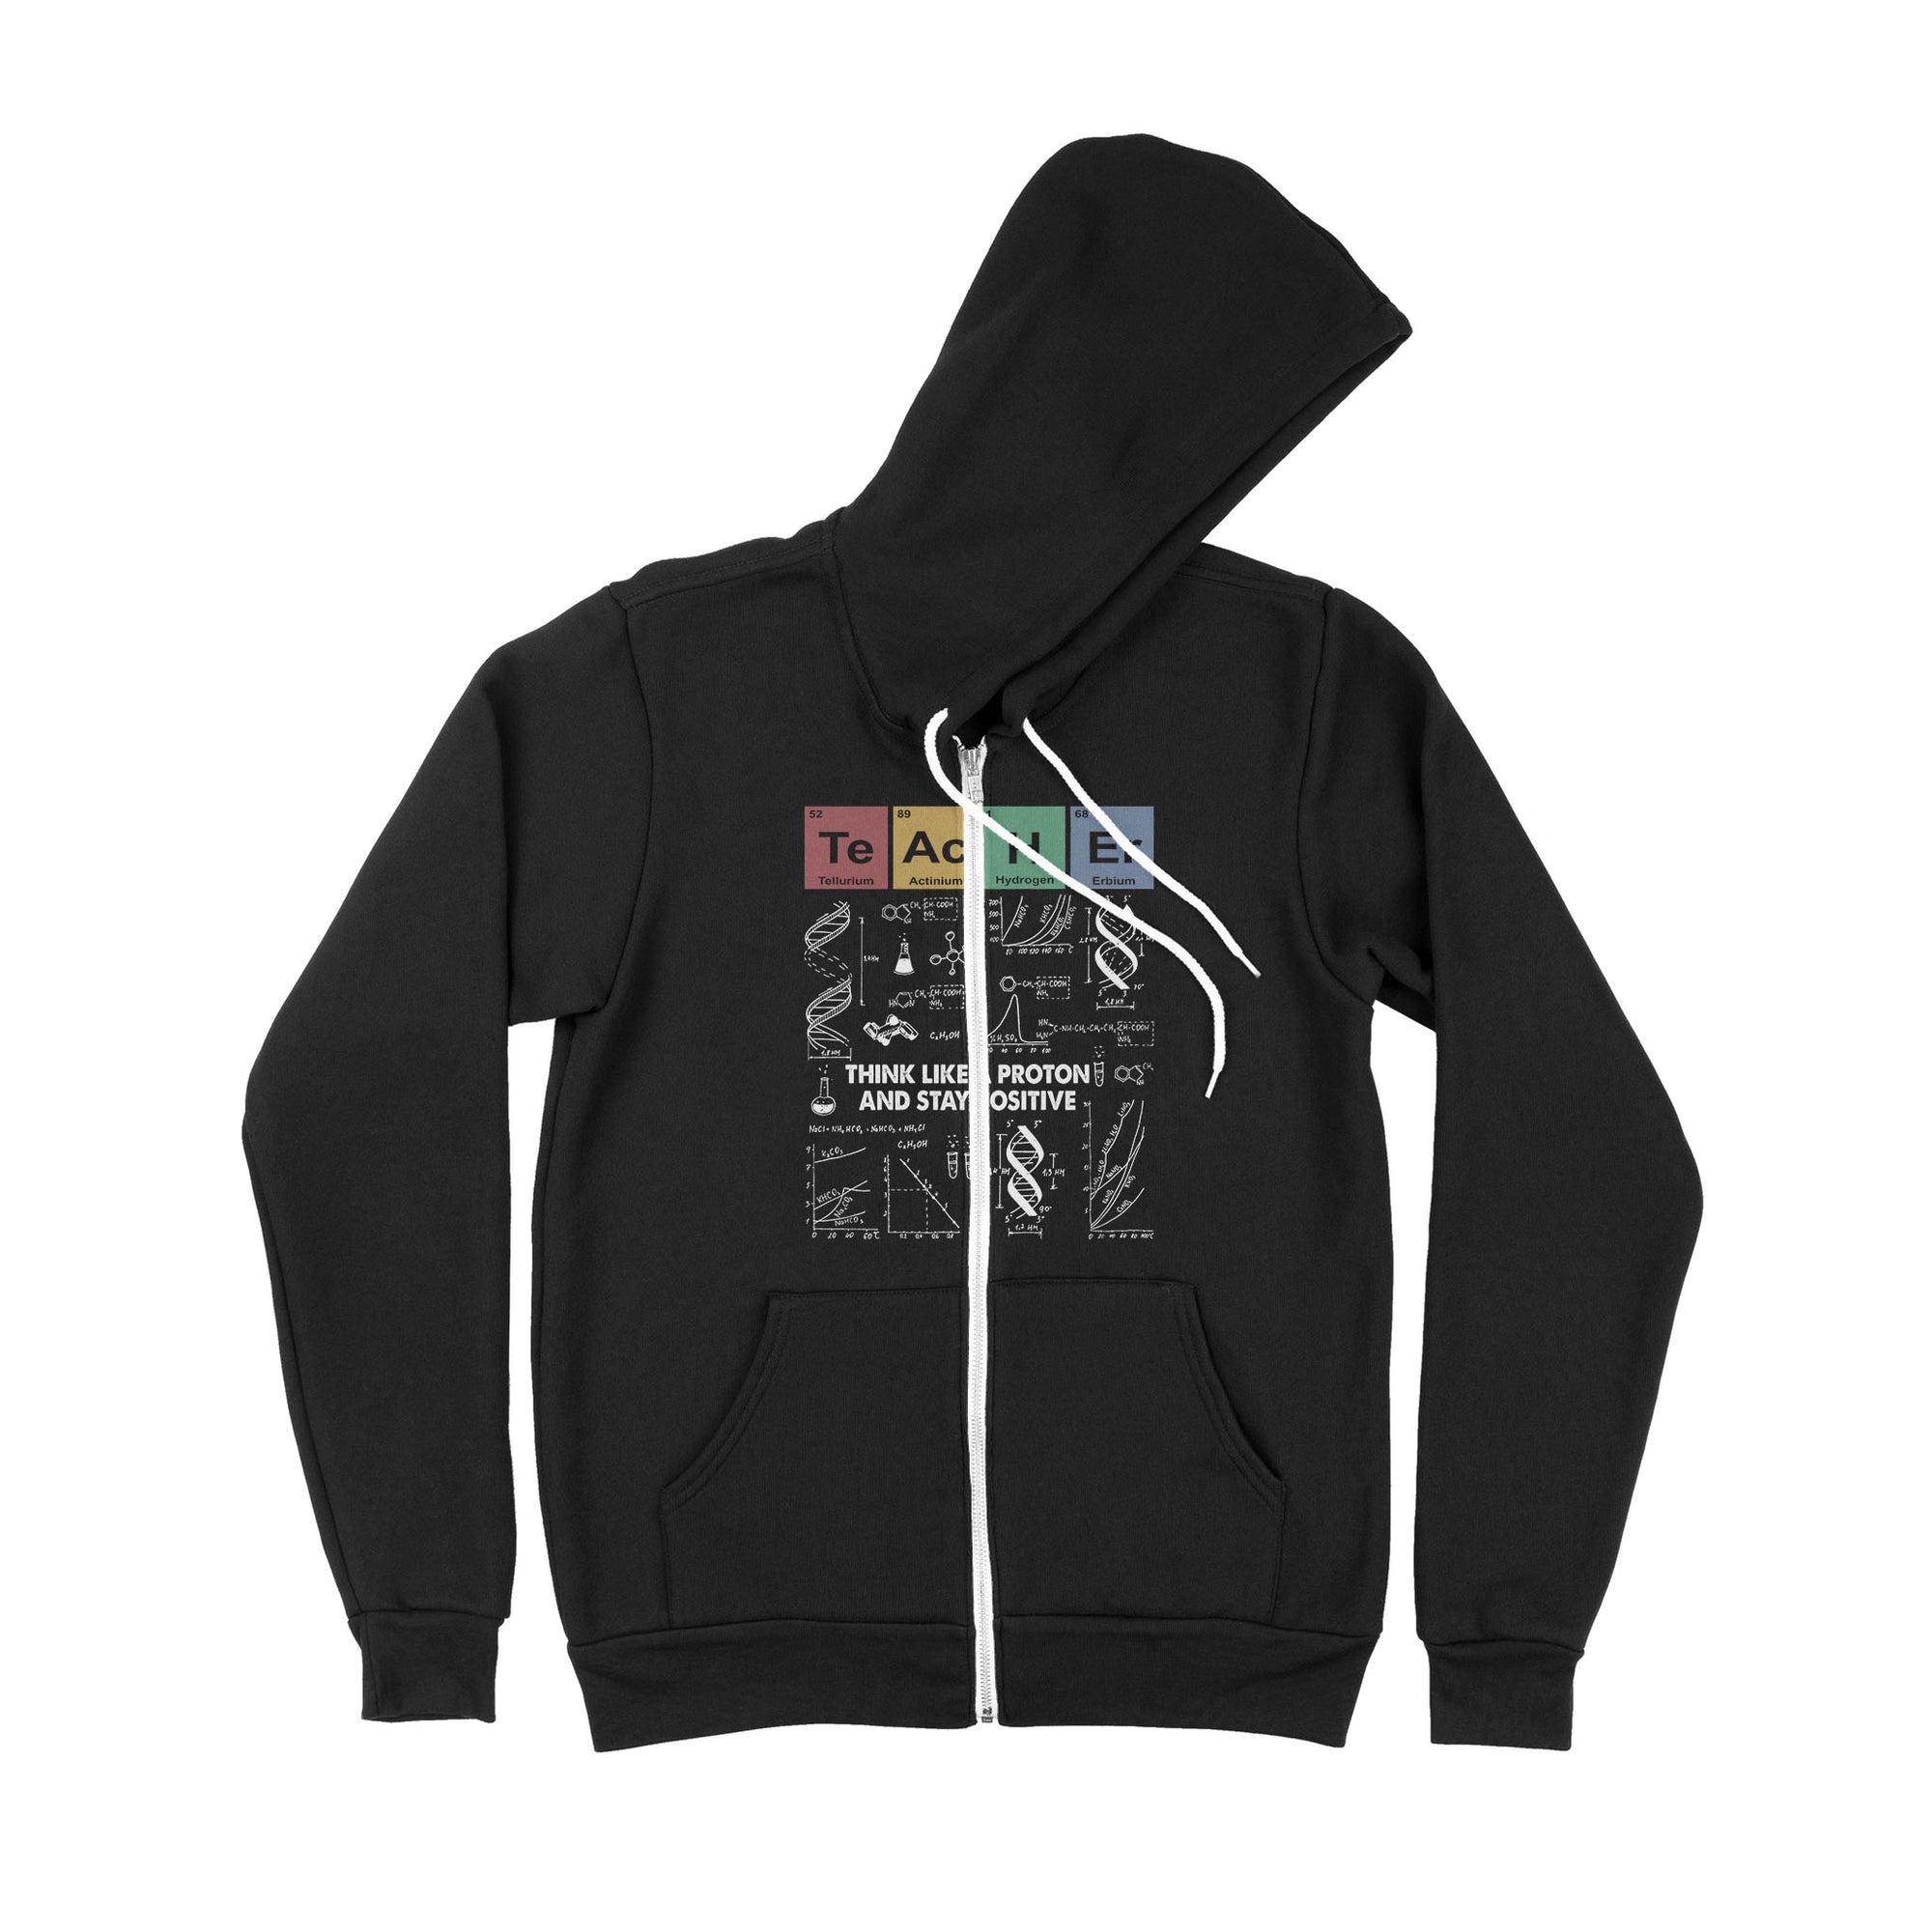 Teacher Think Like A Proton And Stay Positive - Premium Zip Hoodie